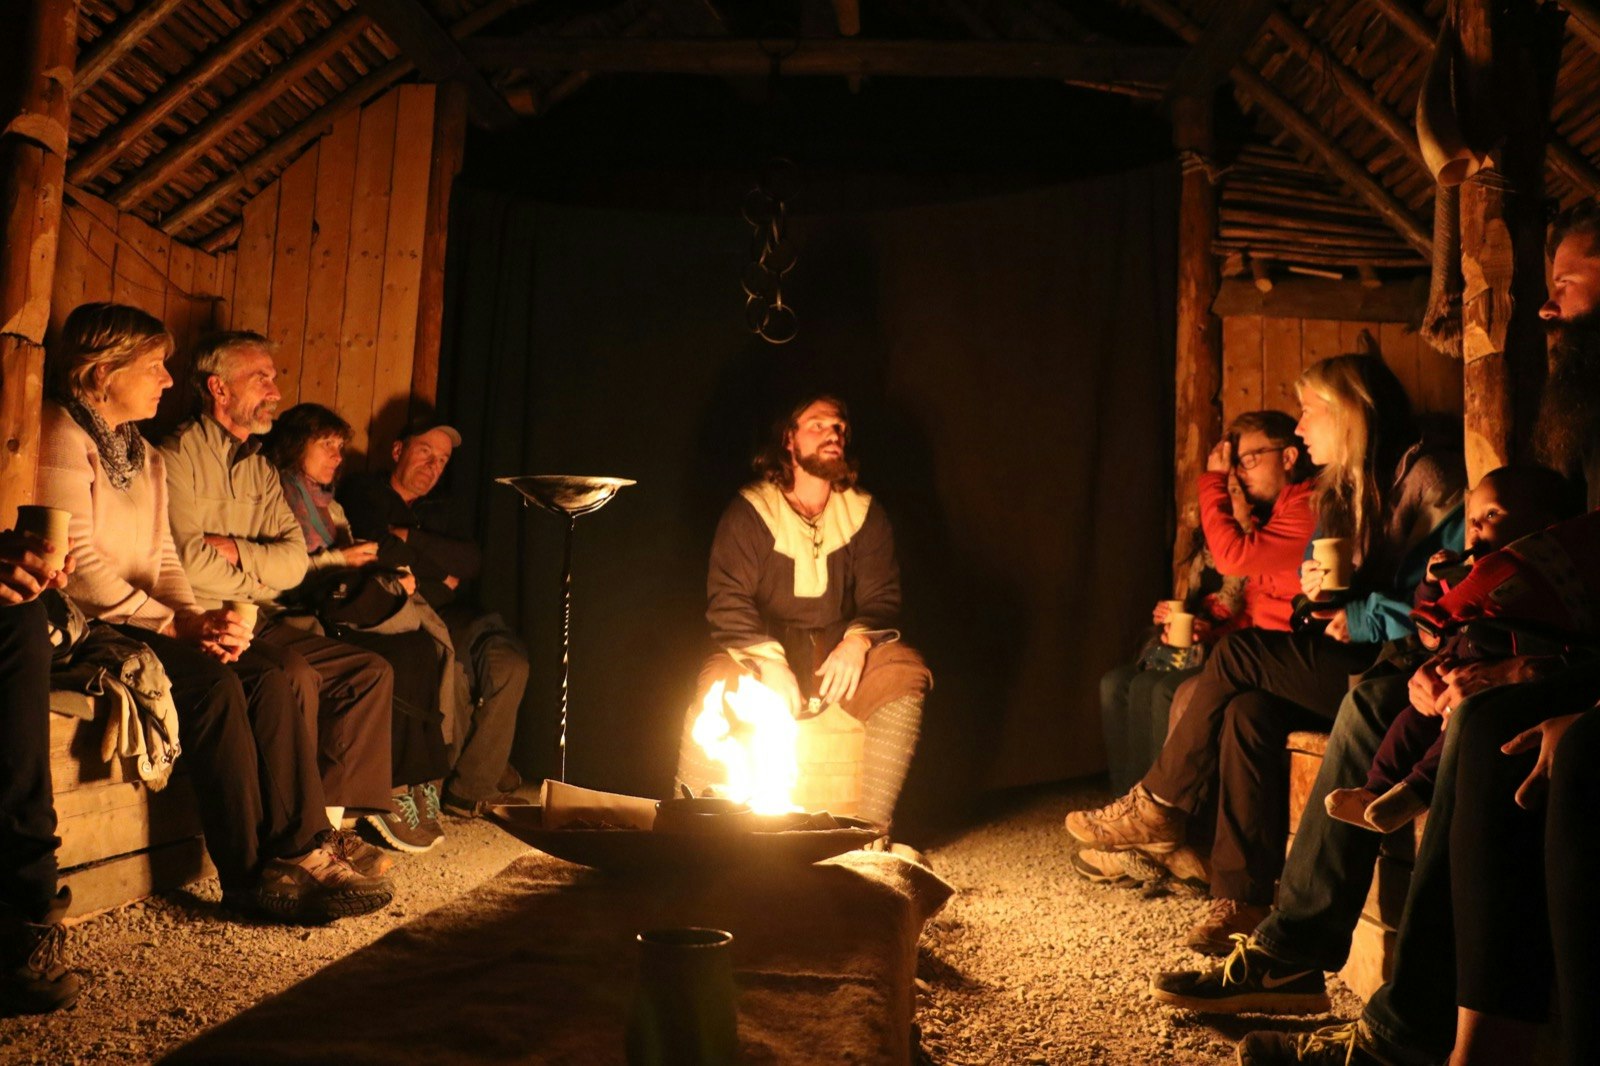 A man dressed in Viking regalia speaks to a group of travelers inside a wooden structure, illuminated by a central fire